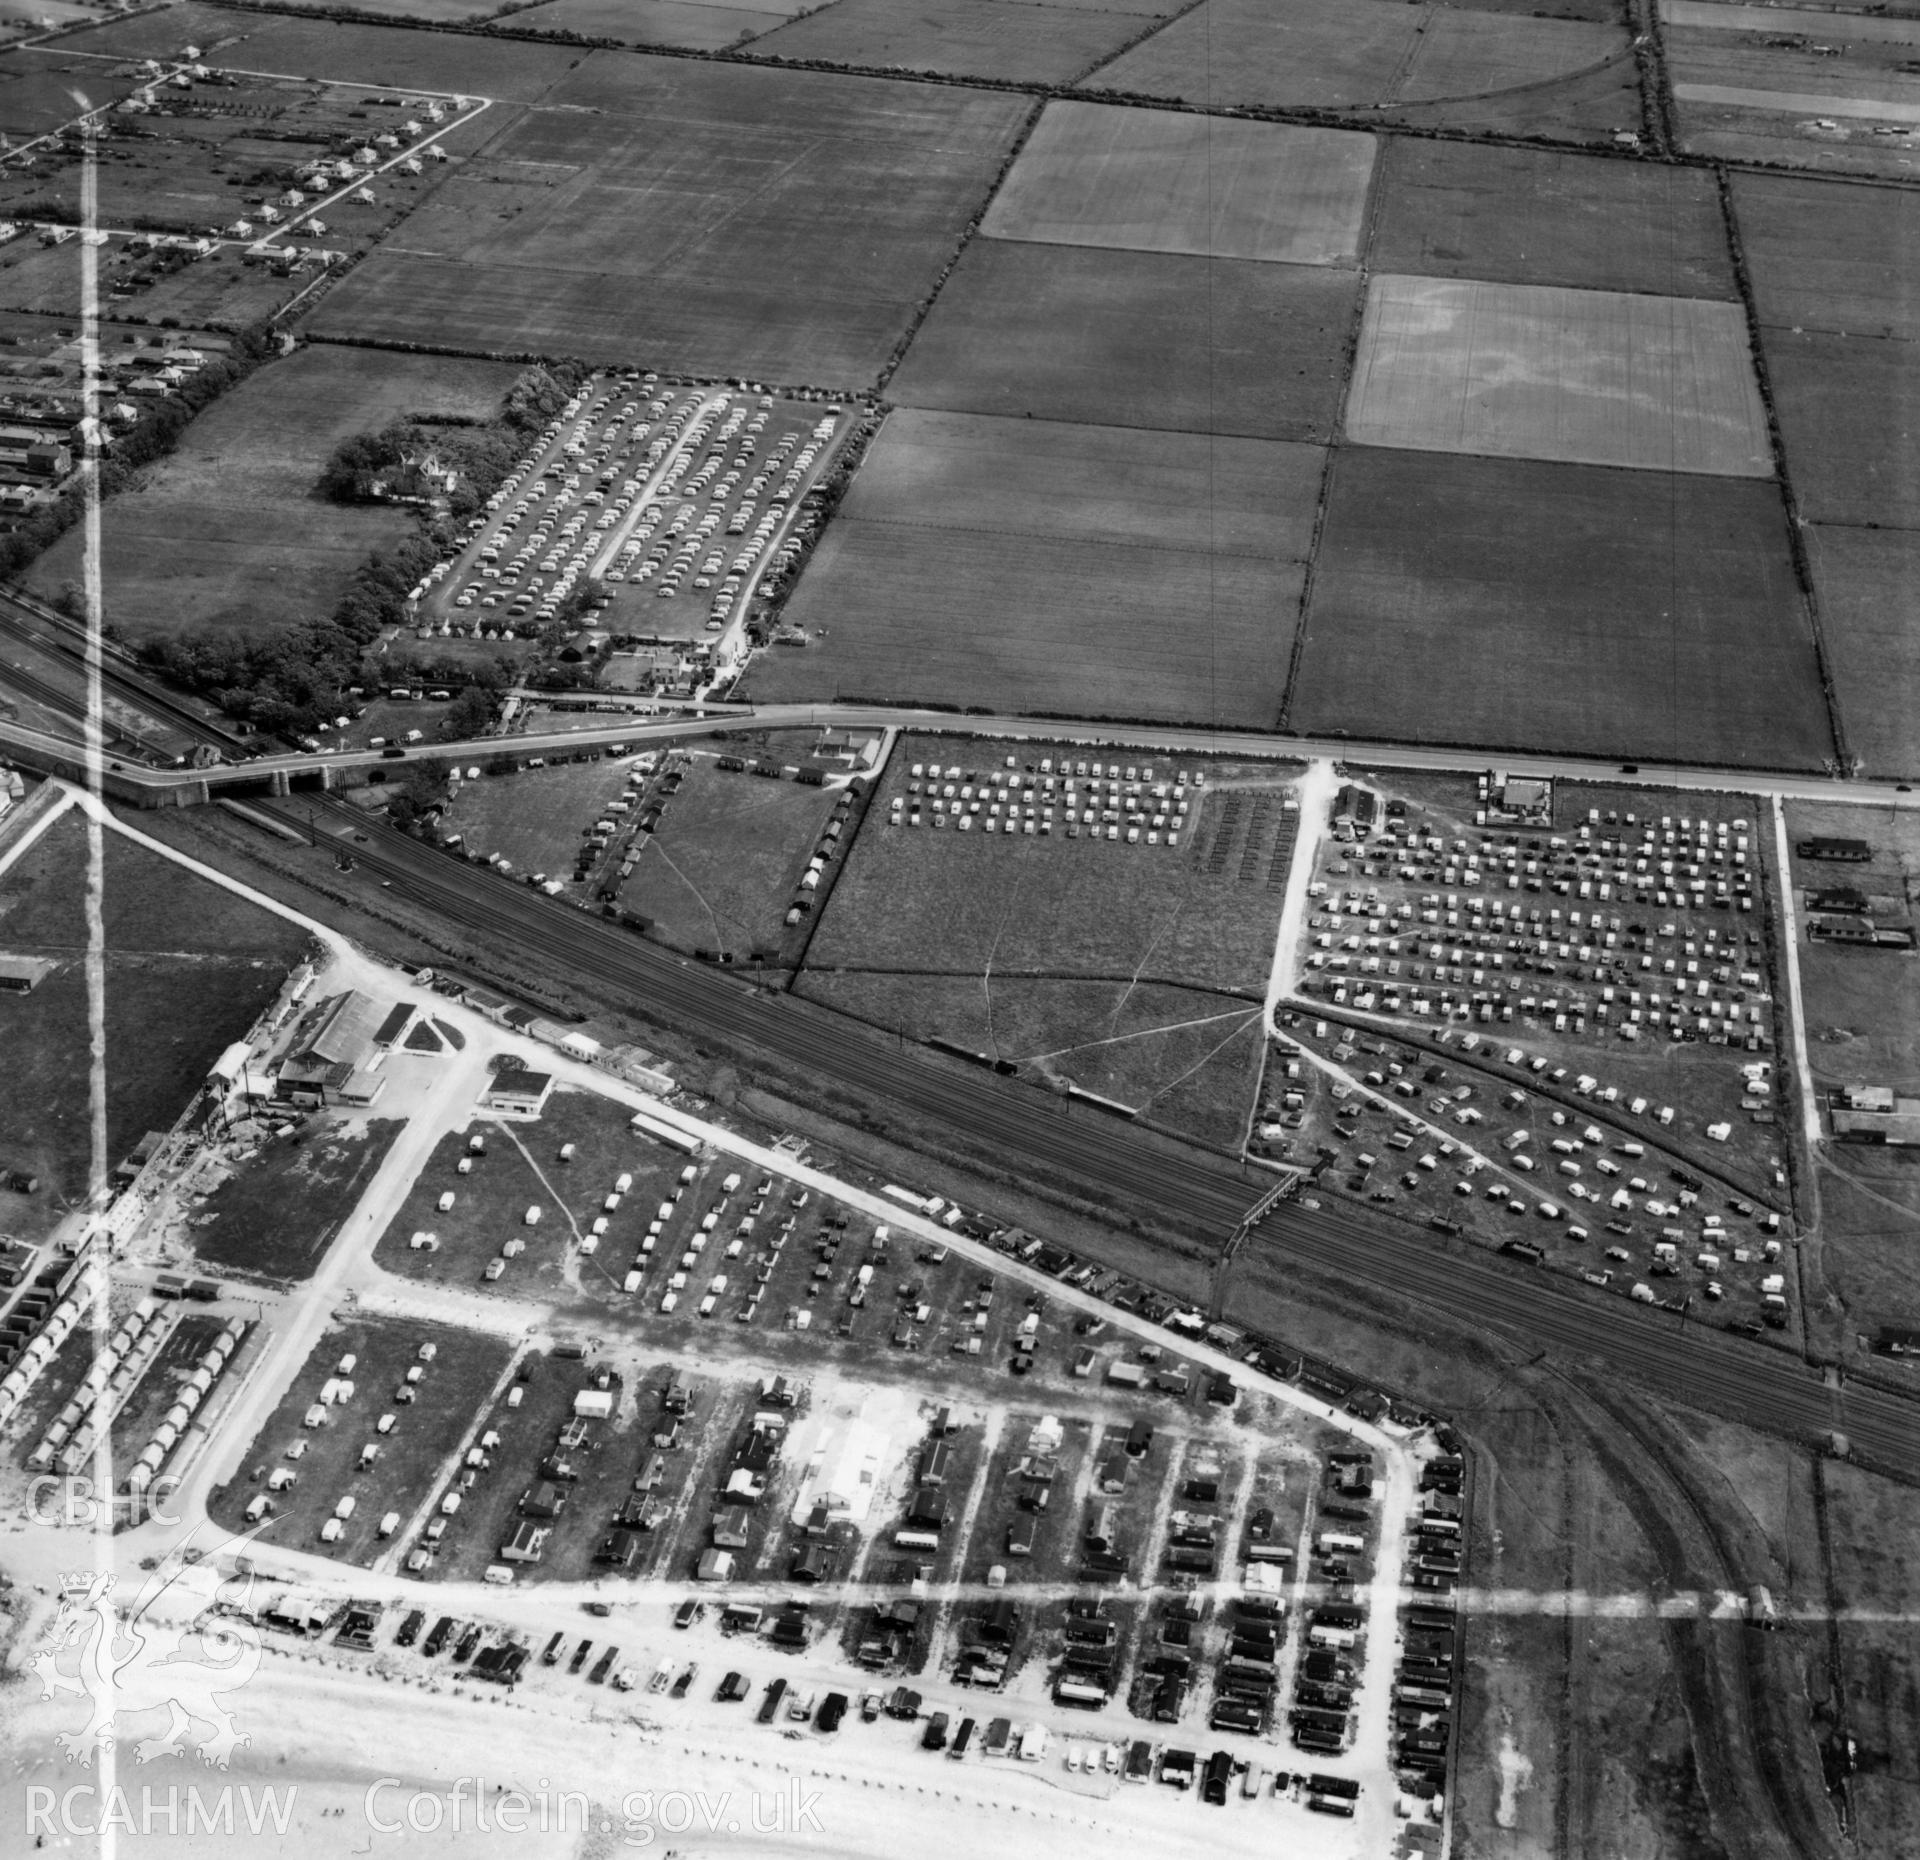 View of Winkups Holiday Camp, Foryd, commissioned by W.H.Smith & Son Ltd.. Oblique aerial photograph, 5?" cut roll film.